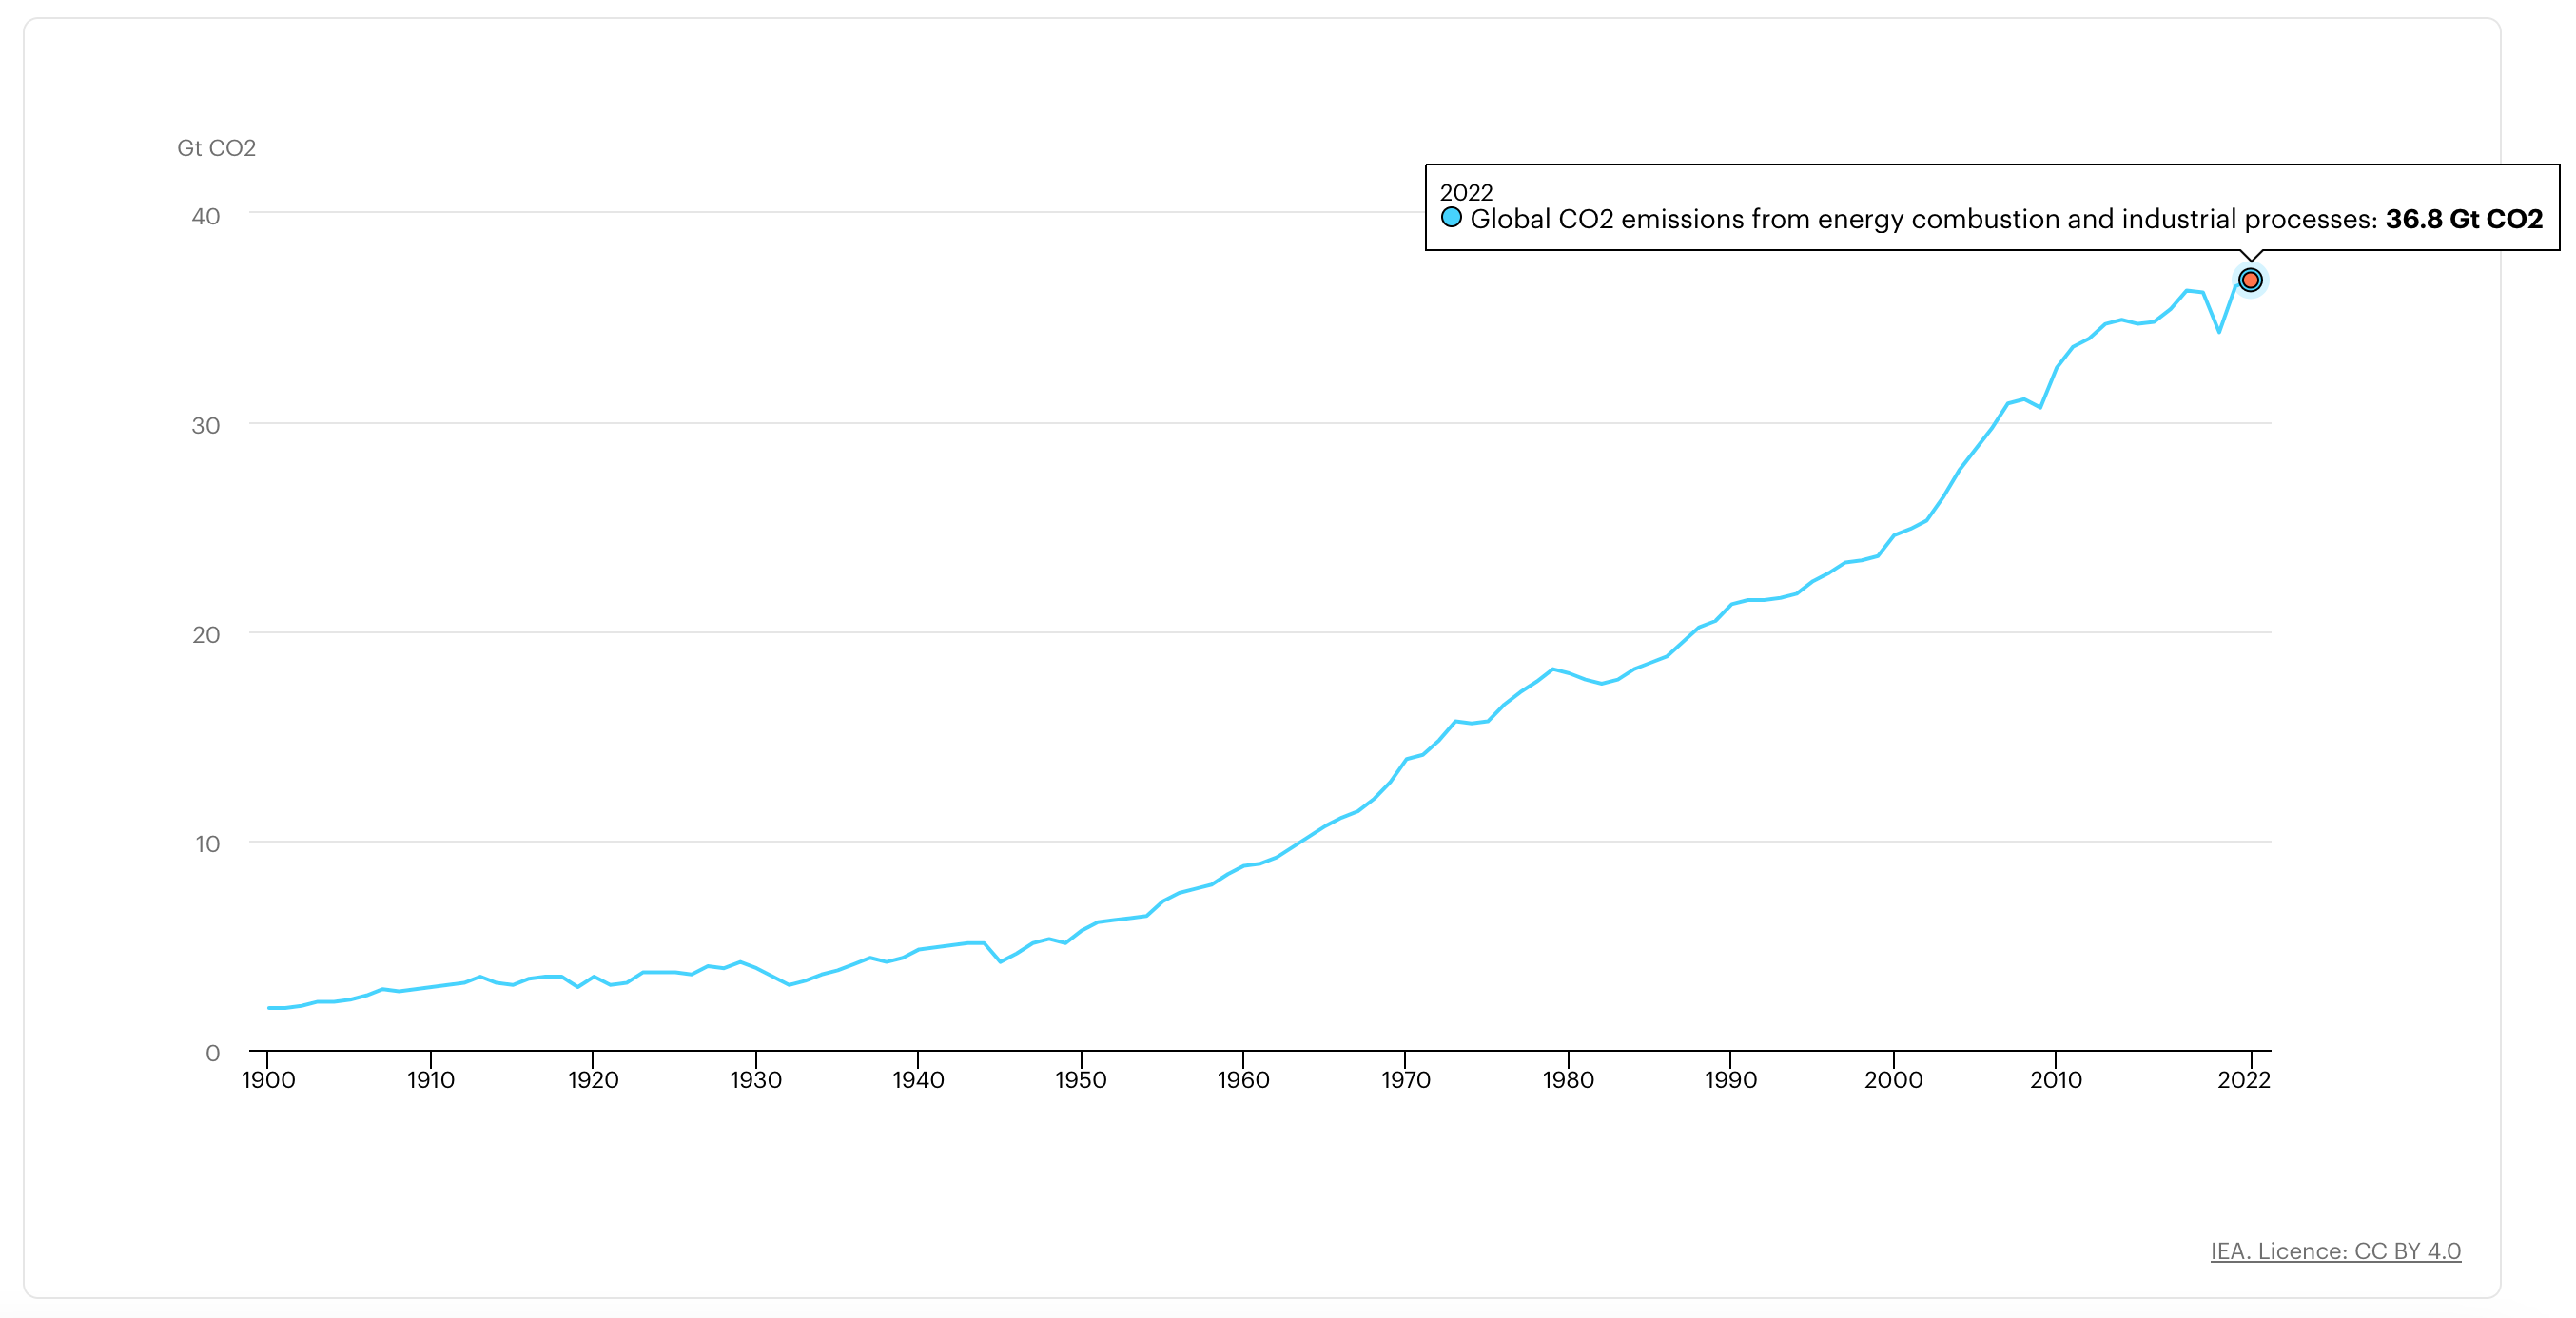 Ever increasing CO2 emissions, although it did slow down